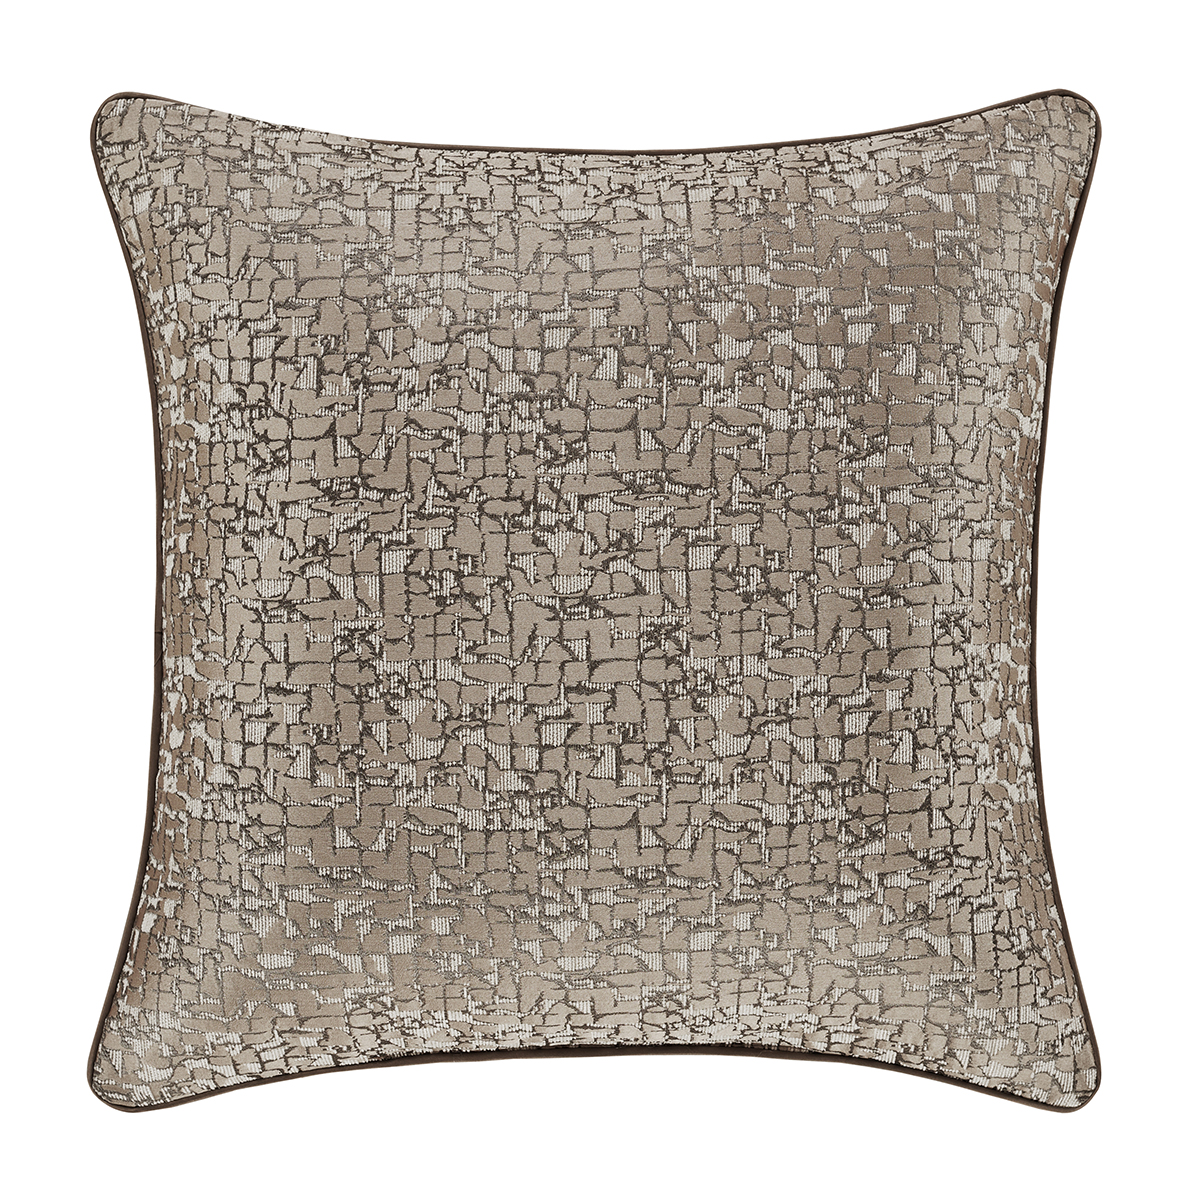 J. Queen New York Cracked Ice Square Decorative Pillow  - 20x20